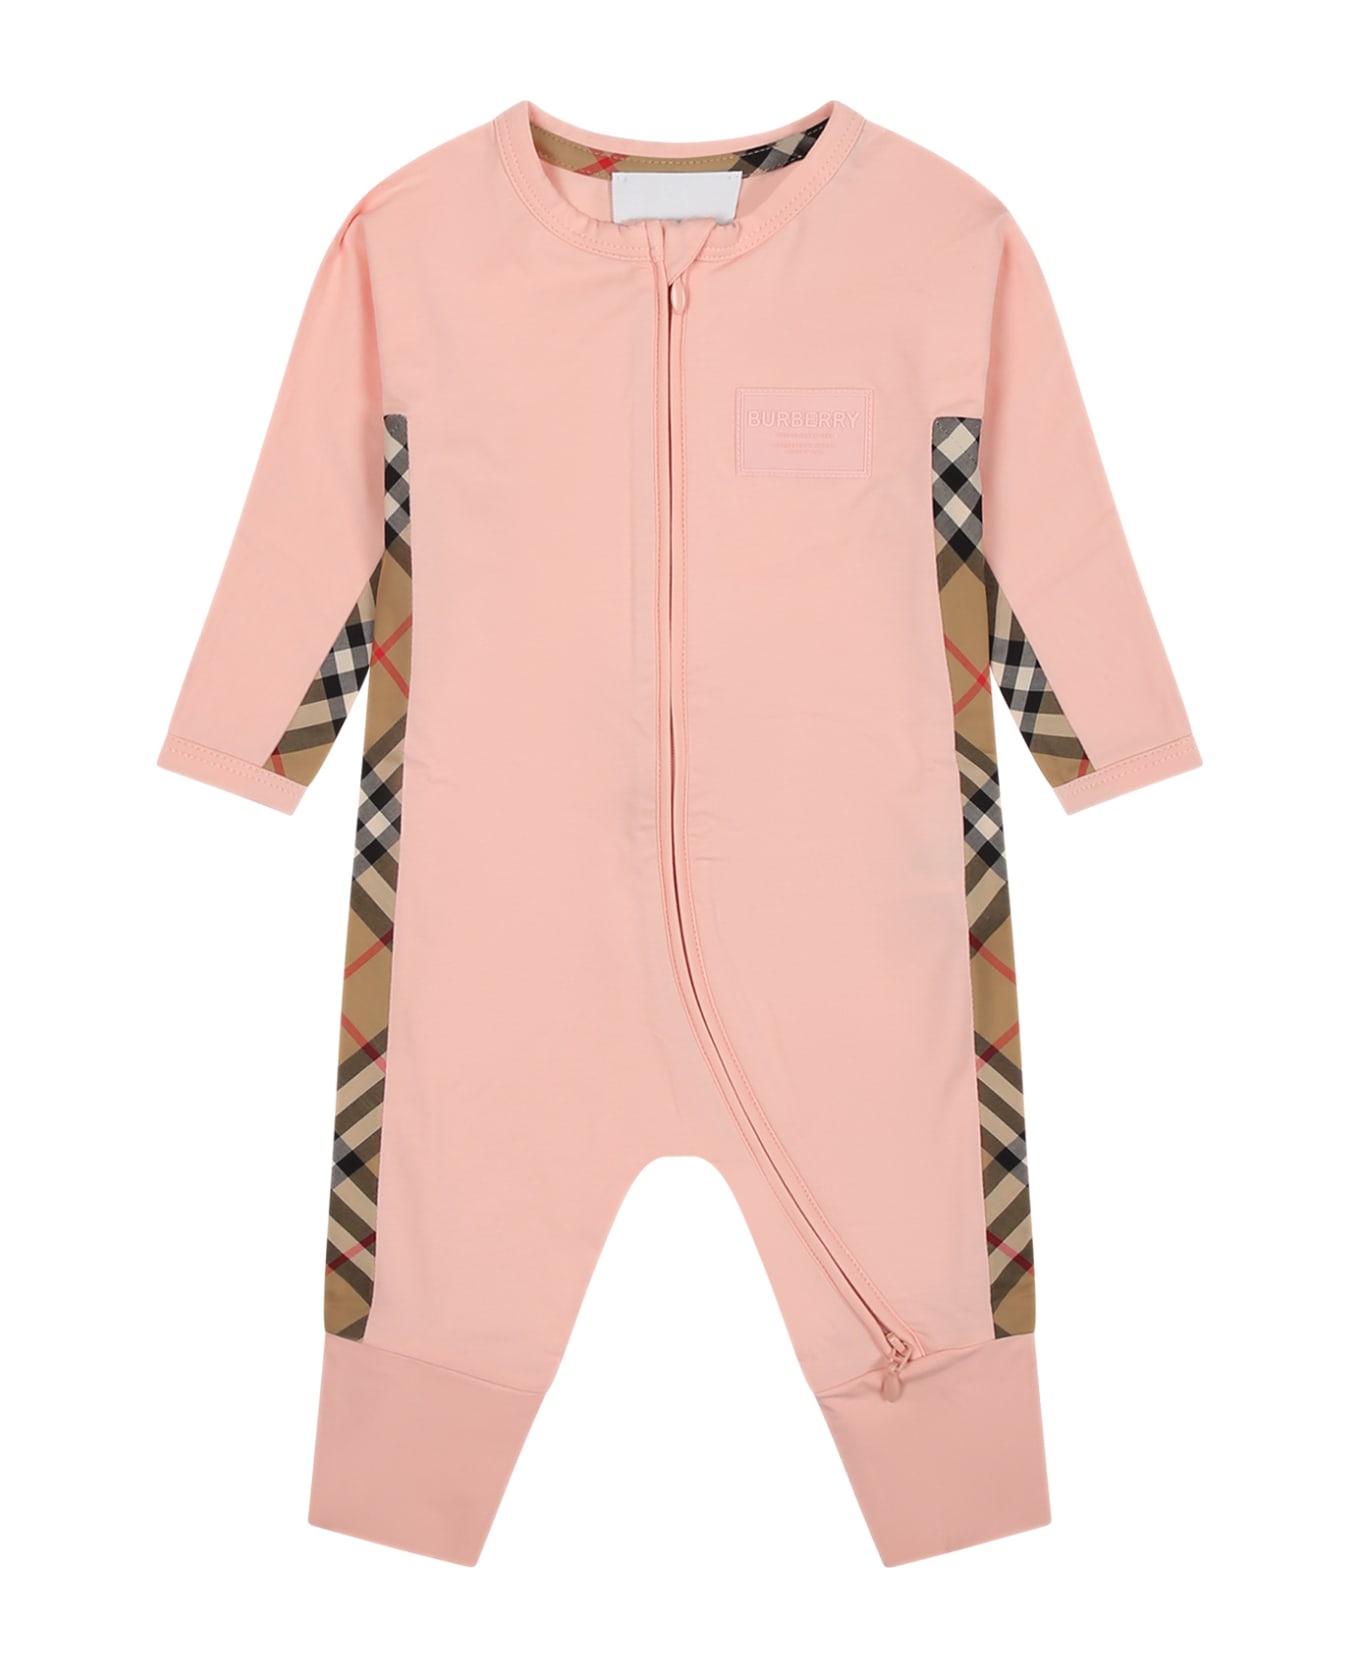 Burberry Pink Set For Baby Girl With Logo - Pink